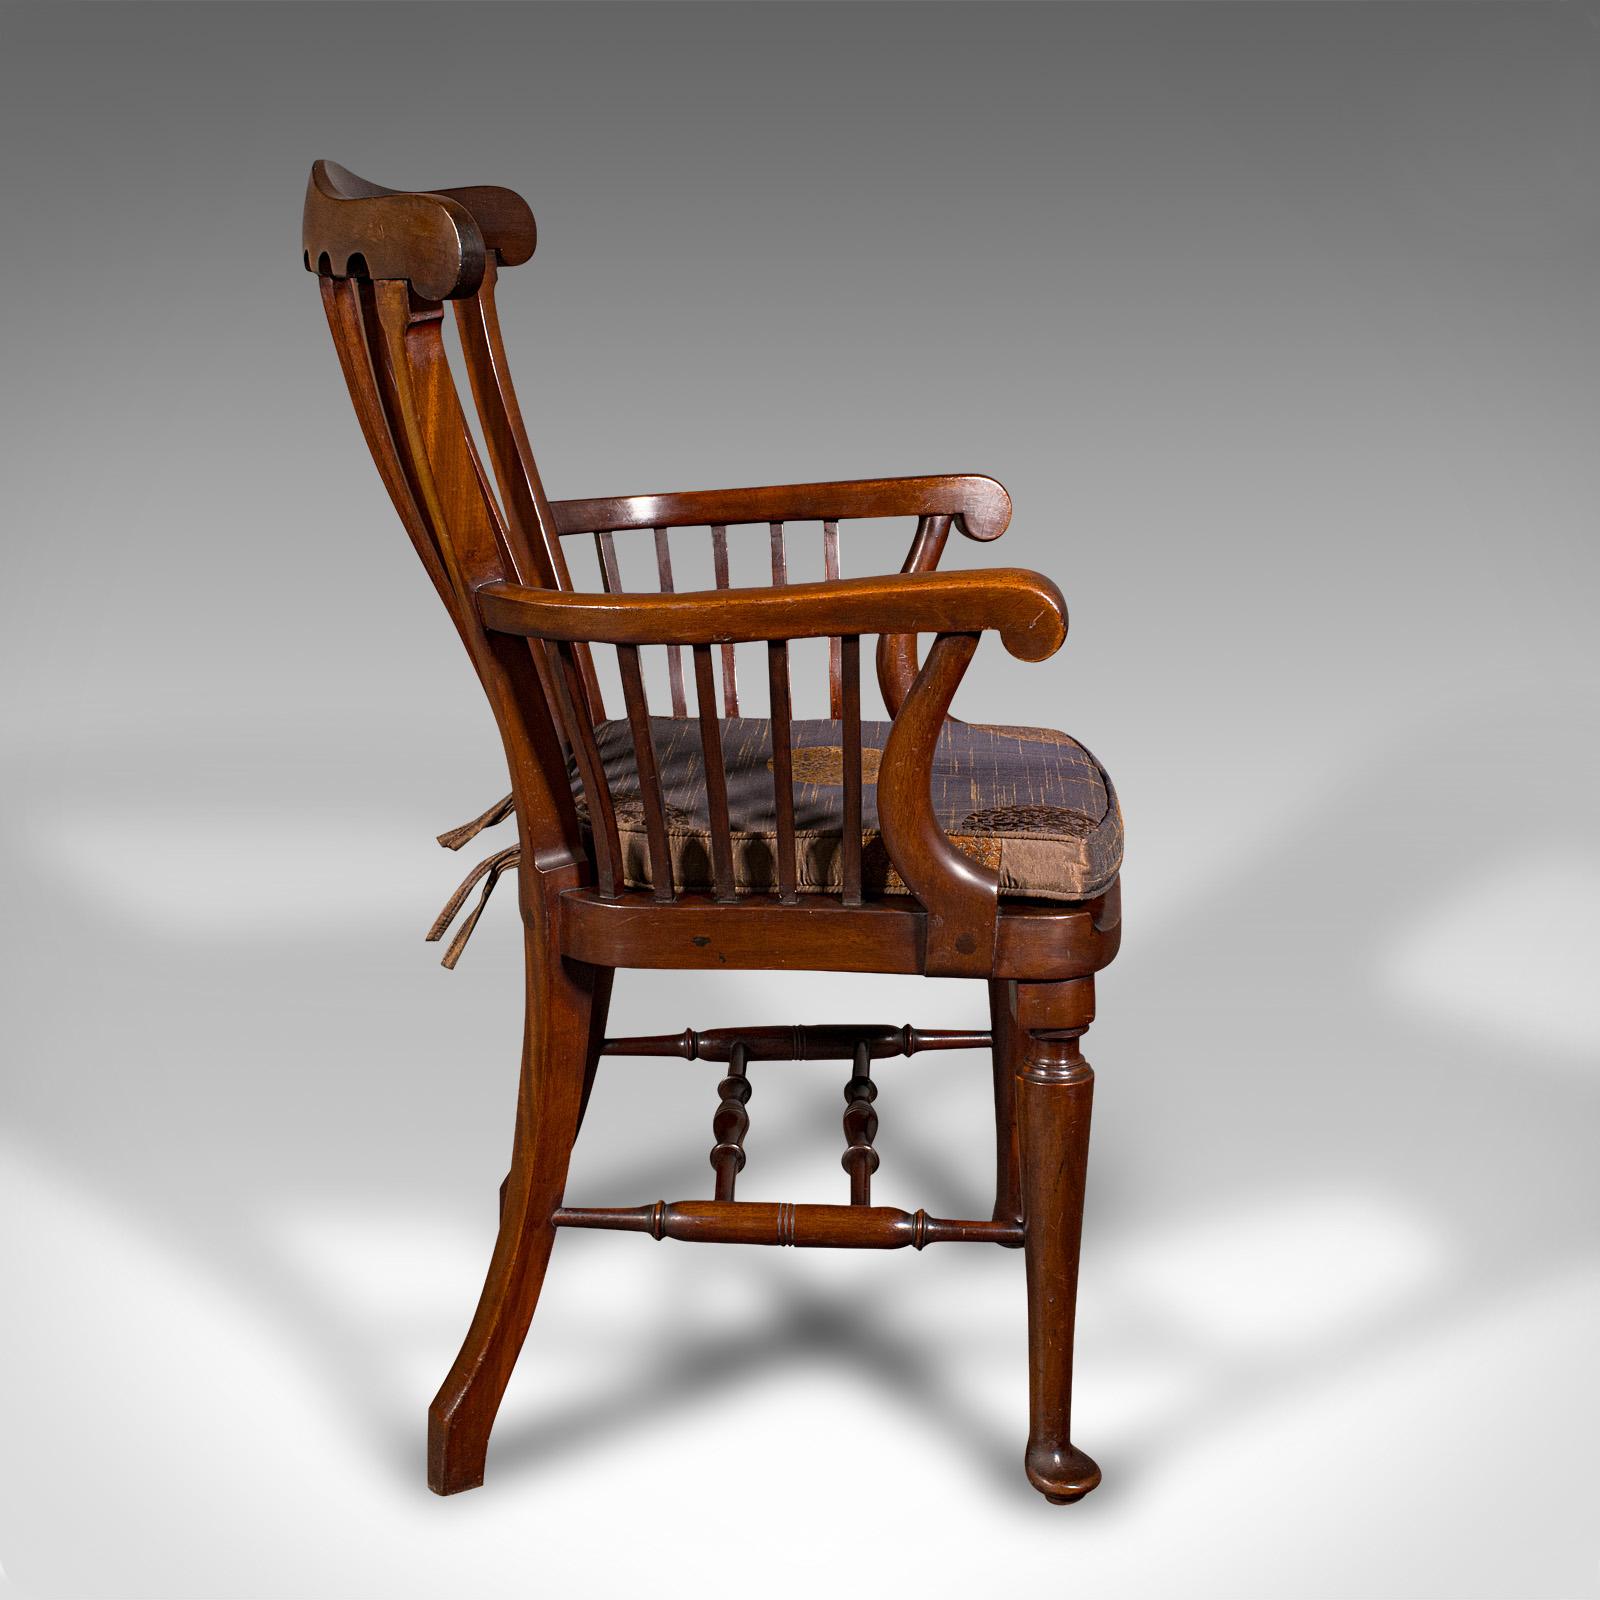 British Antique Cleric's Armchair, English, Elbow Chair, Georgian Revival, Victorian For Sale